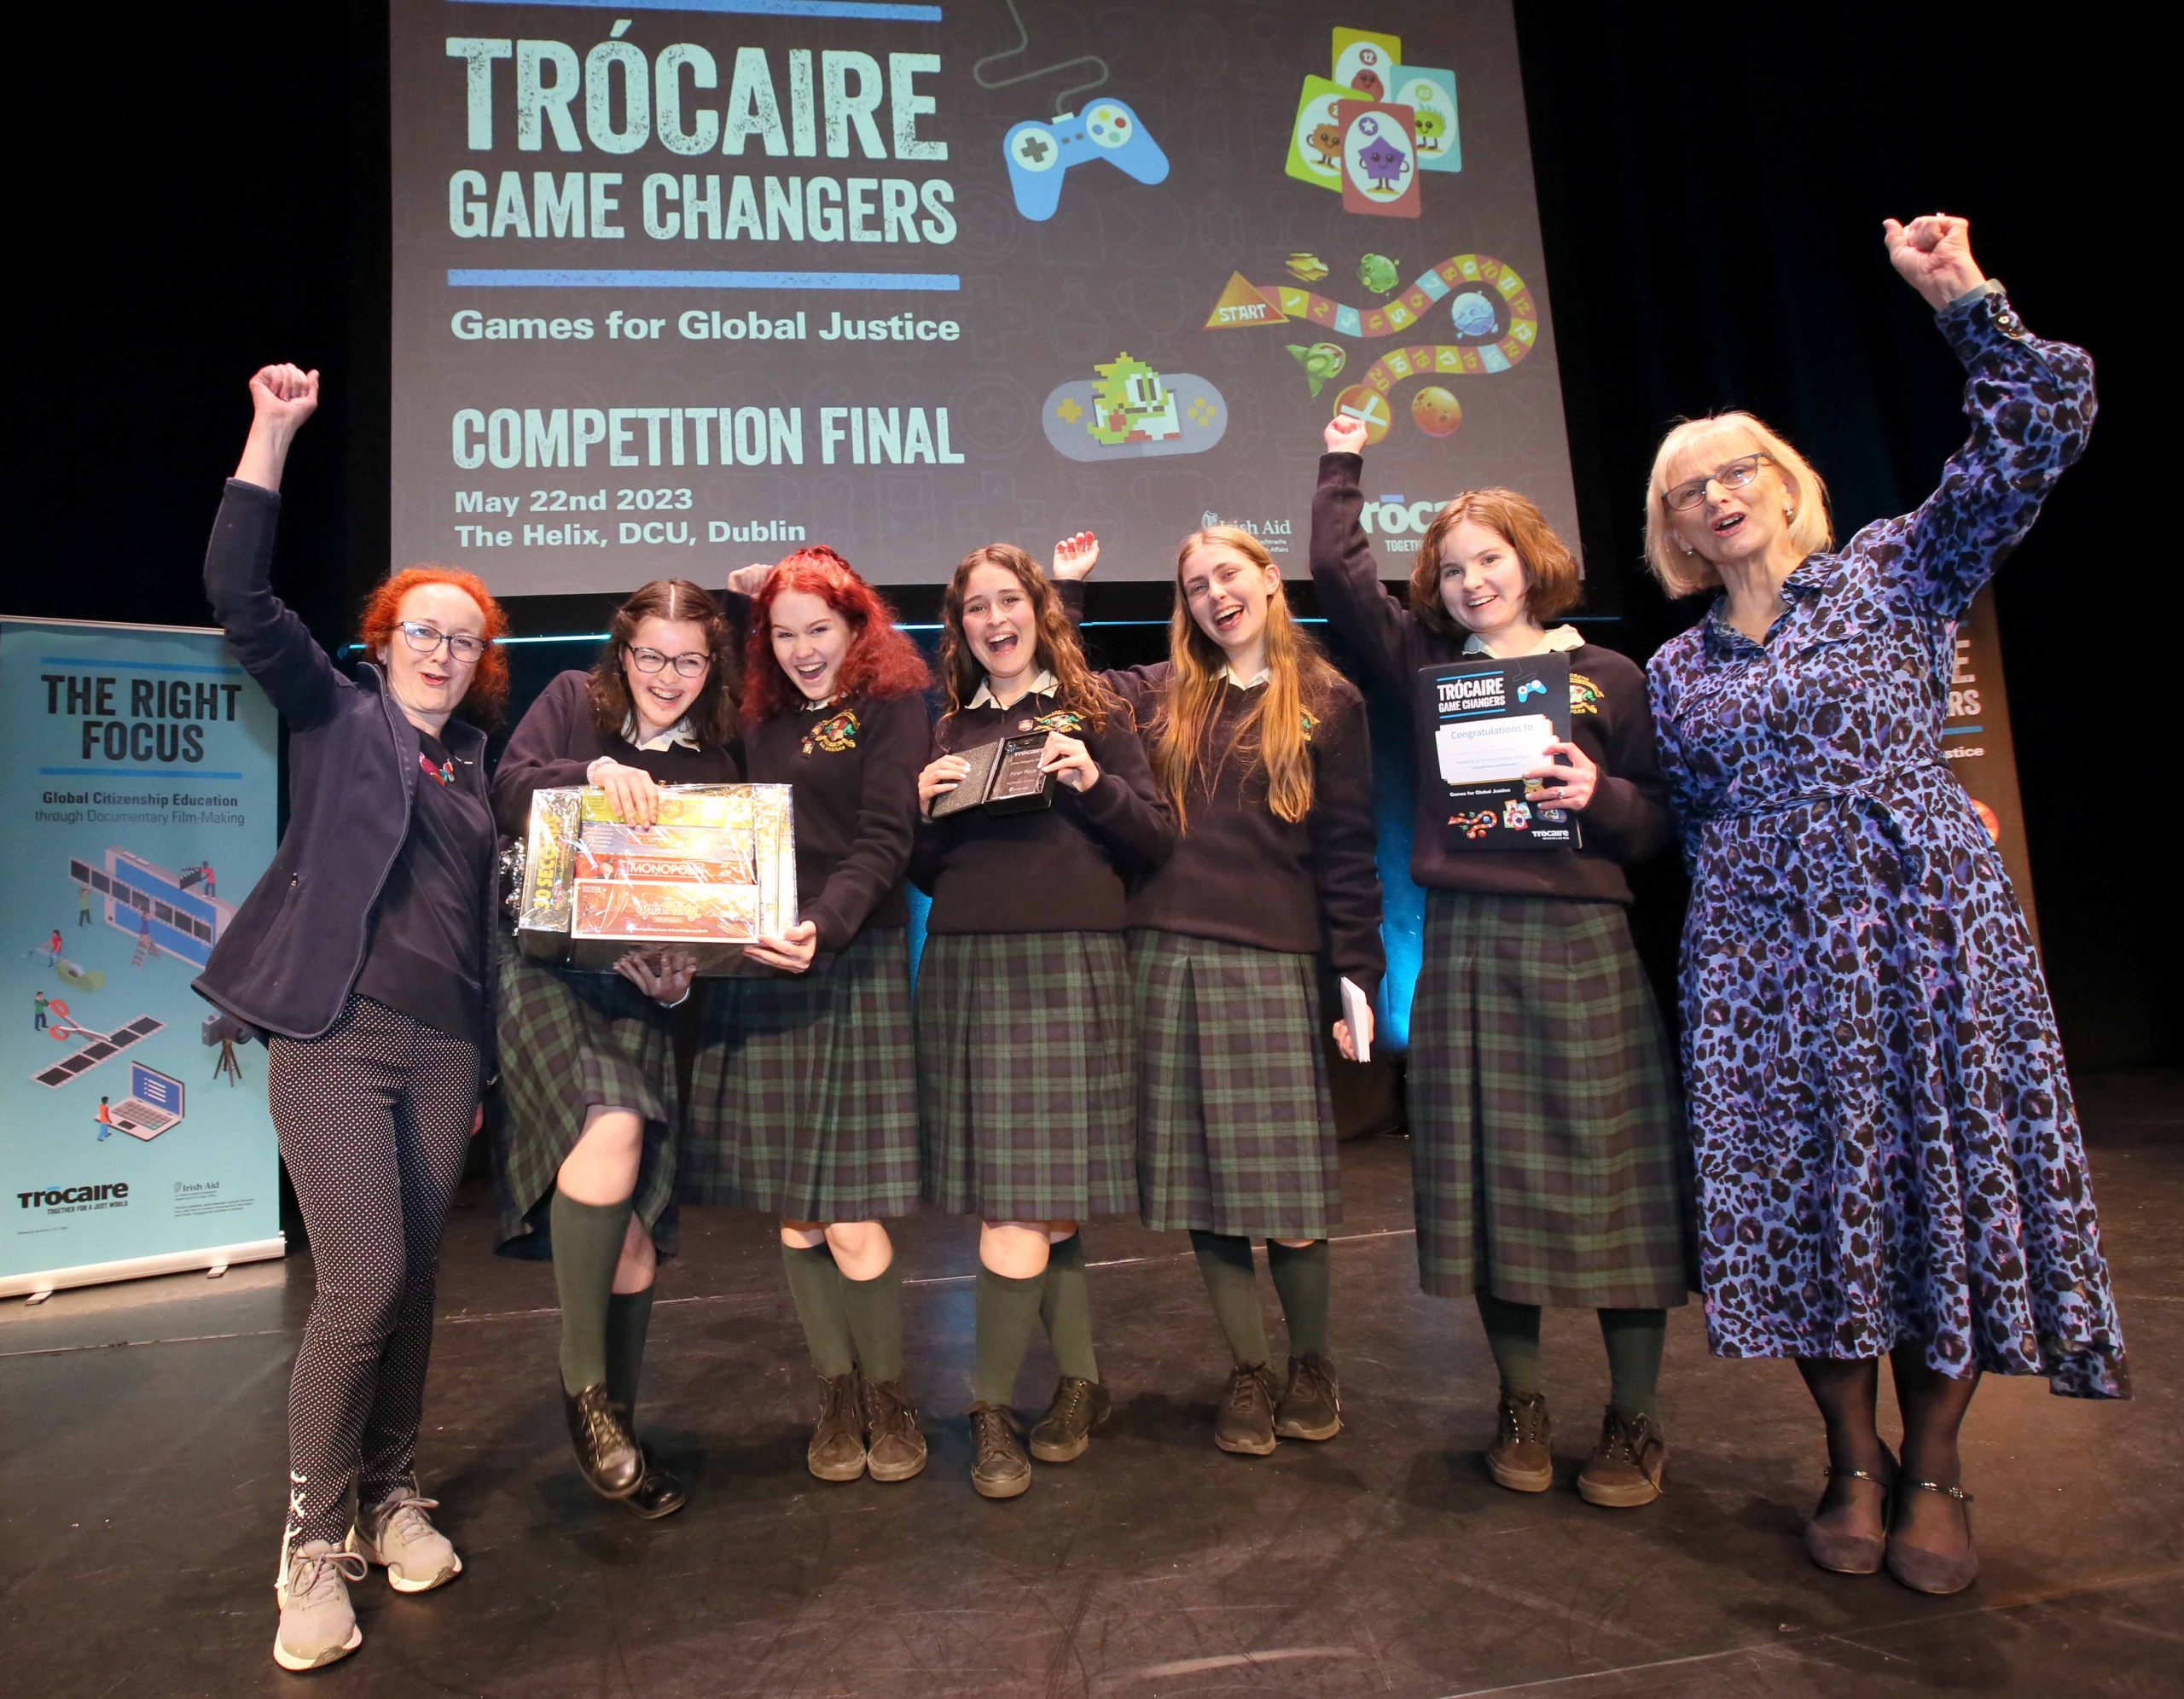 Pictured at the 2023 Trócaire Game Changers and Right Focus Competitions are the Winners of the Post Primary Game Changers Award: Loreto Secondary School, Balbriggan students Aoife, Orla, Molly, Iris, Deirbhile and teacher Paula Grace, left, and Finola Finnan, Deputy Chief Executive Officer Trócaire, with their game ‘A Blob’s Right’ which explores human rights. Photo: Mark Stedman